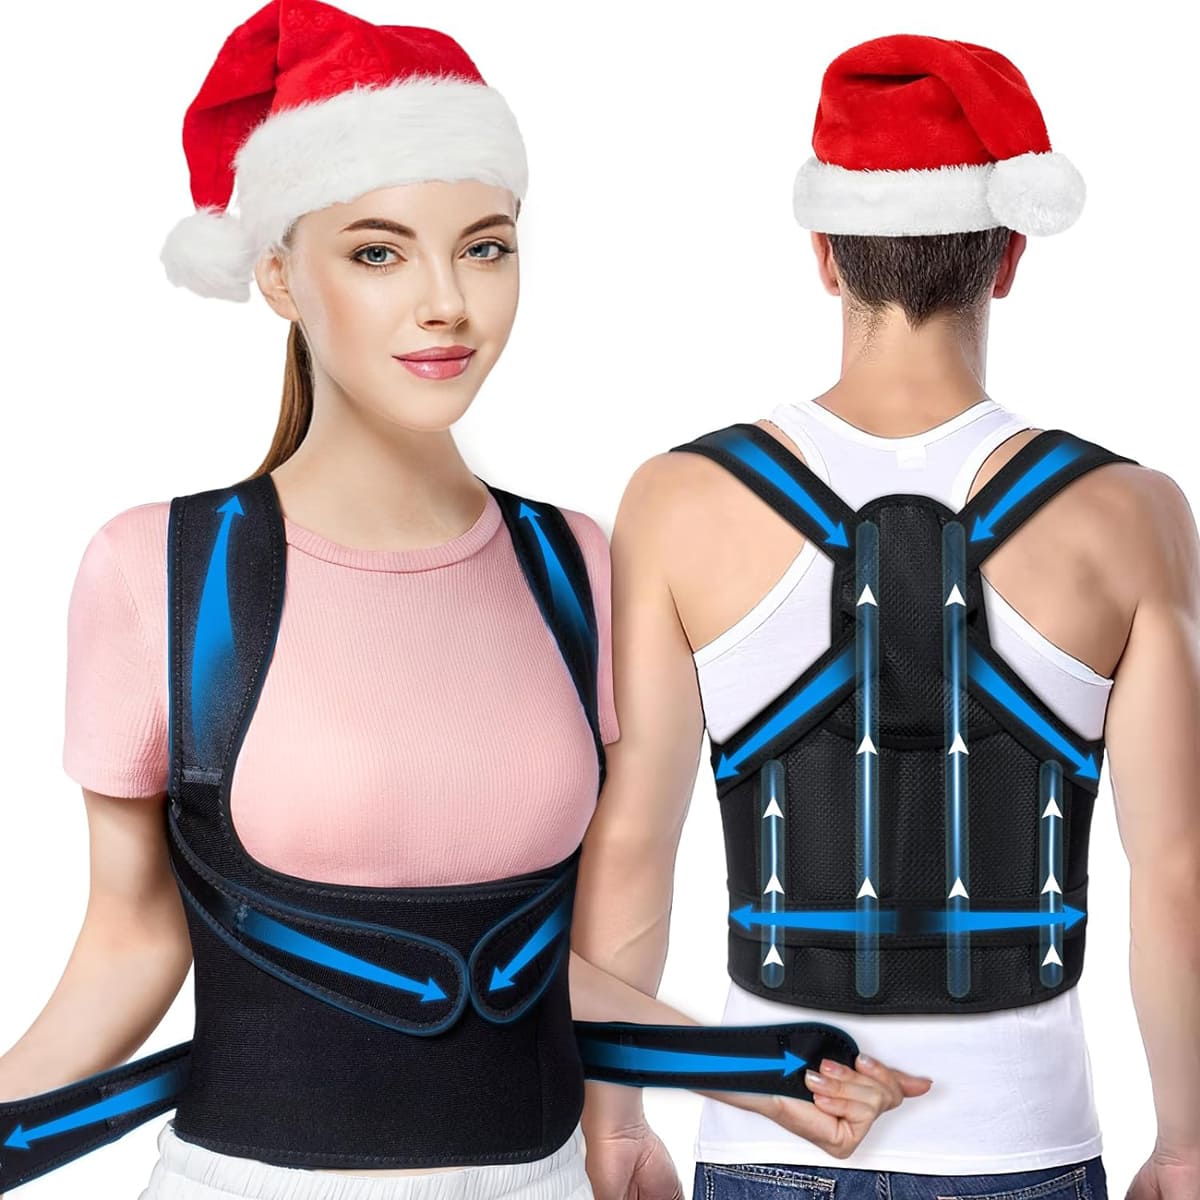 Next Generation Posture Corrector for Men and Women